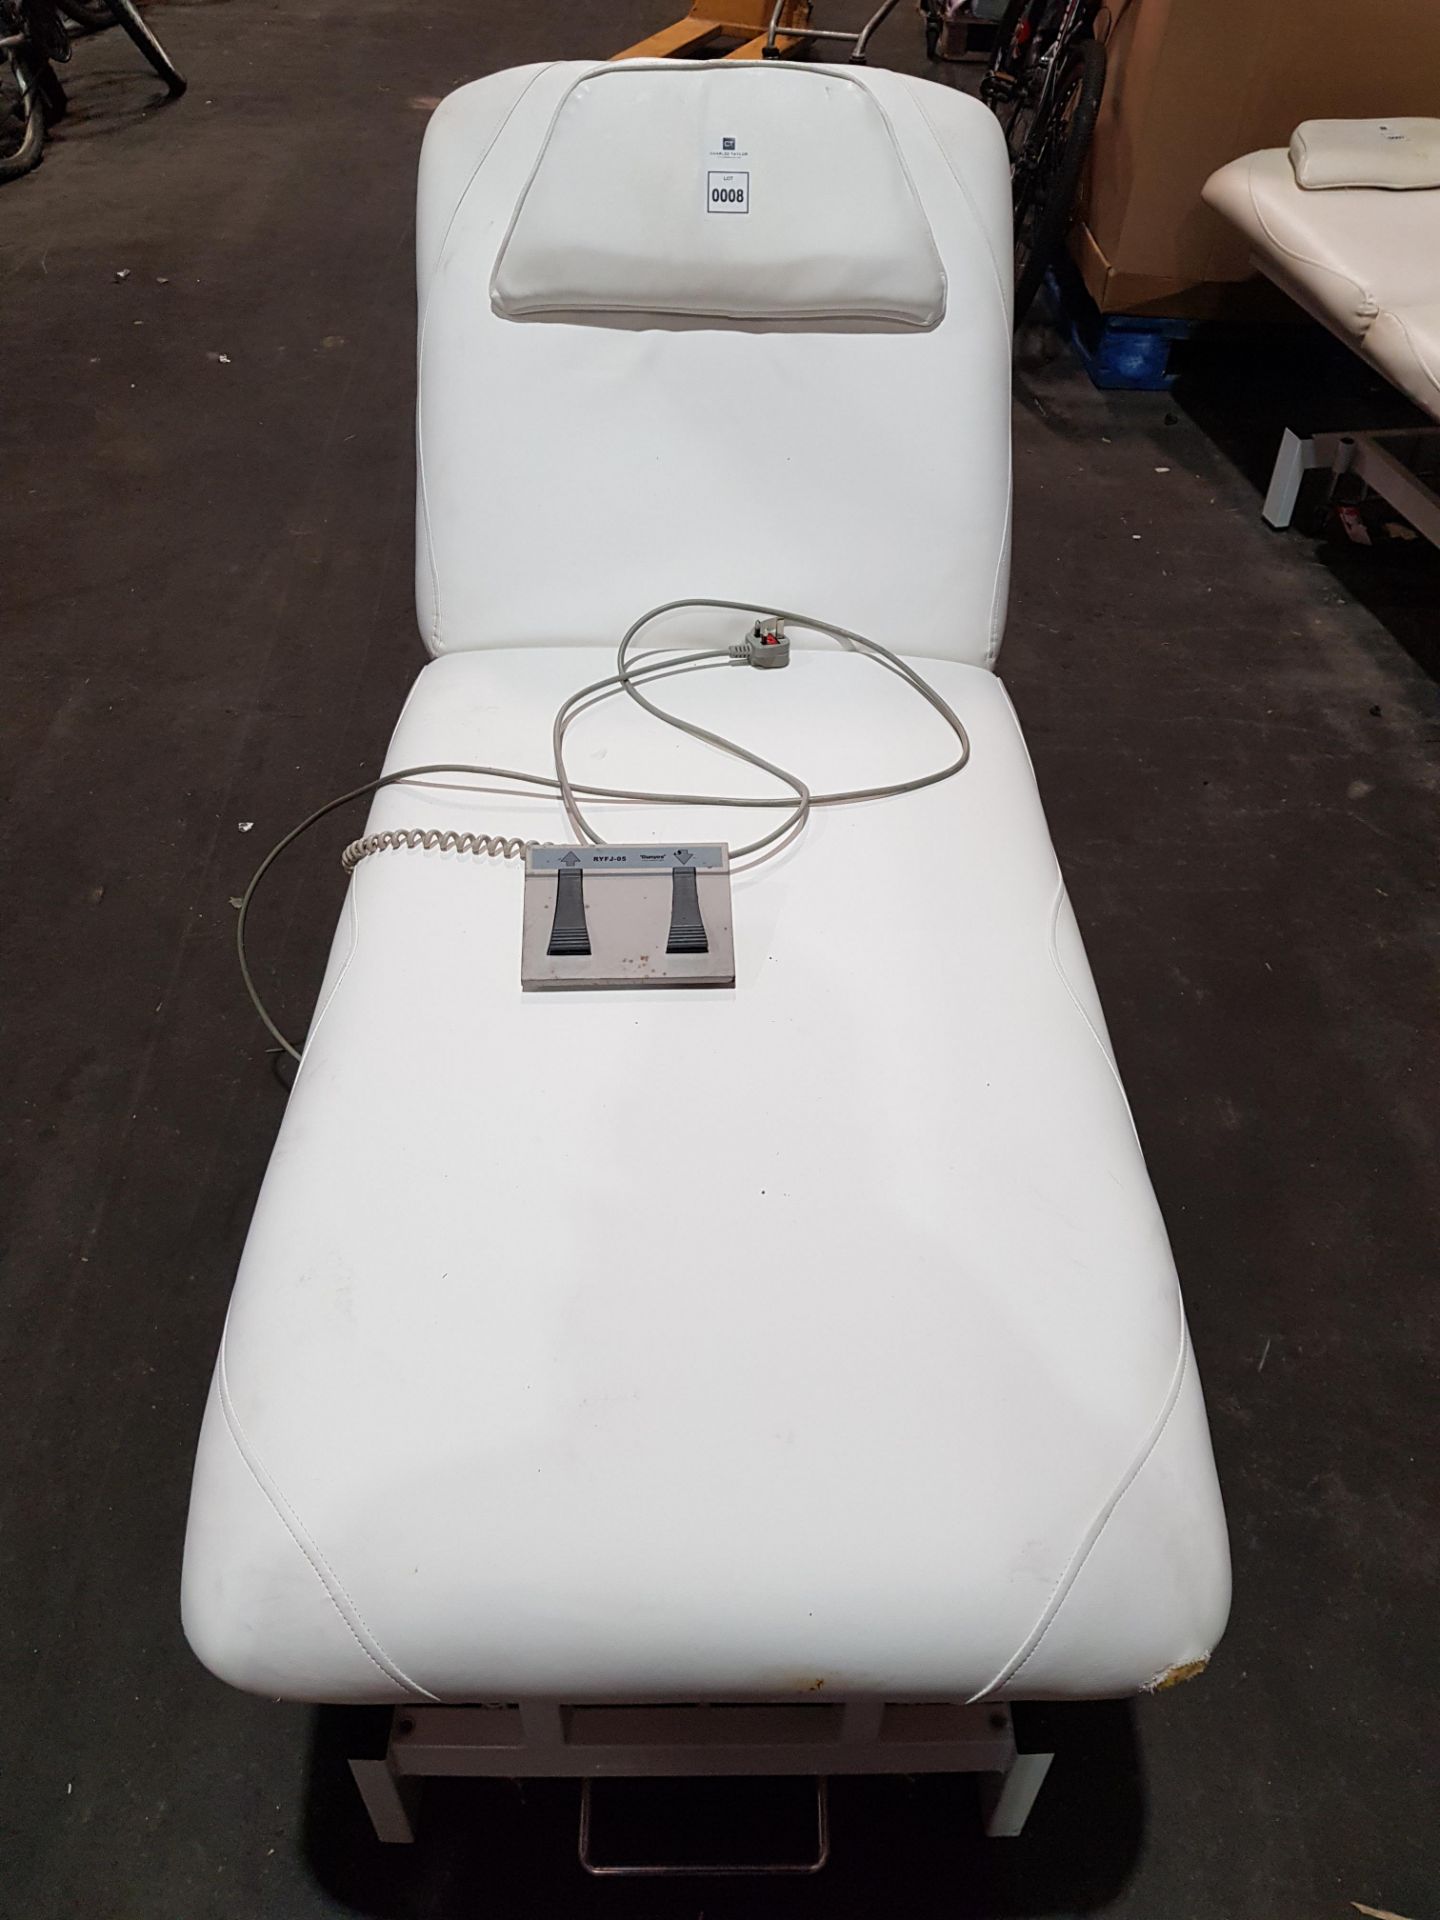 RUNYES RYFJ-05 ELECTRICAL MASSAGE BED (MINOR DAMAGE TO FOOT END) - Image 2 of 3